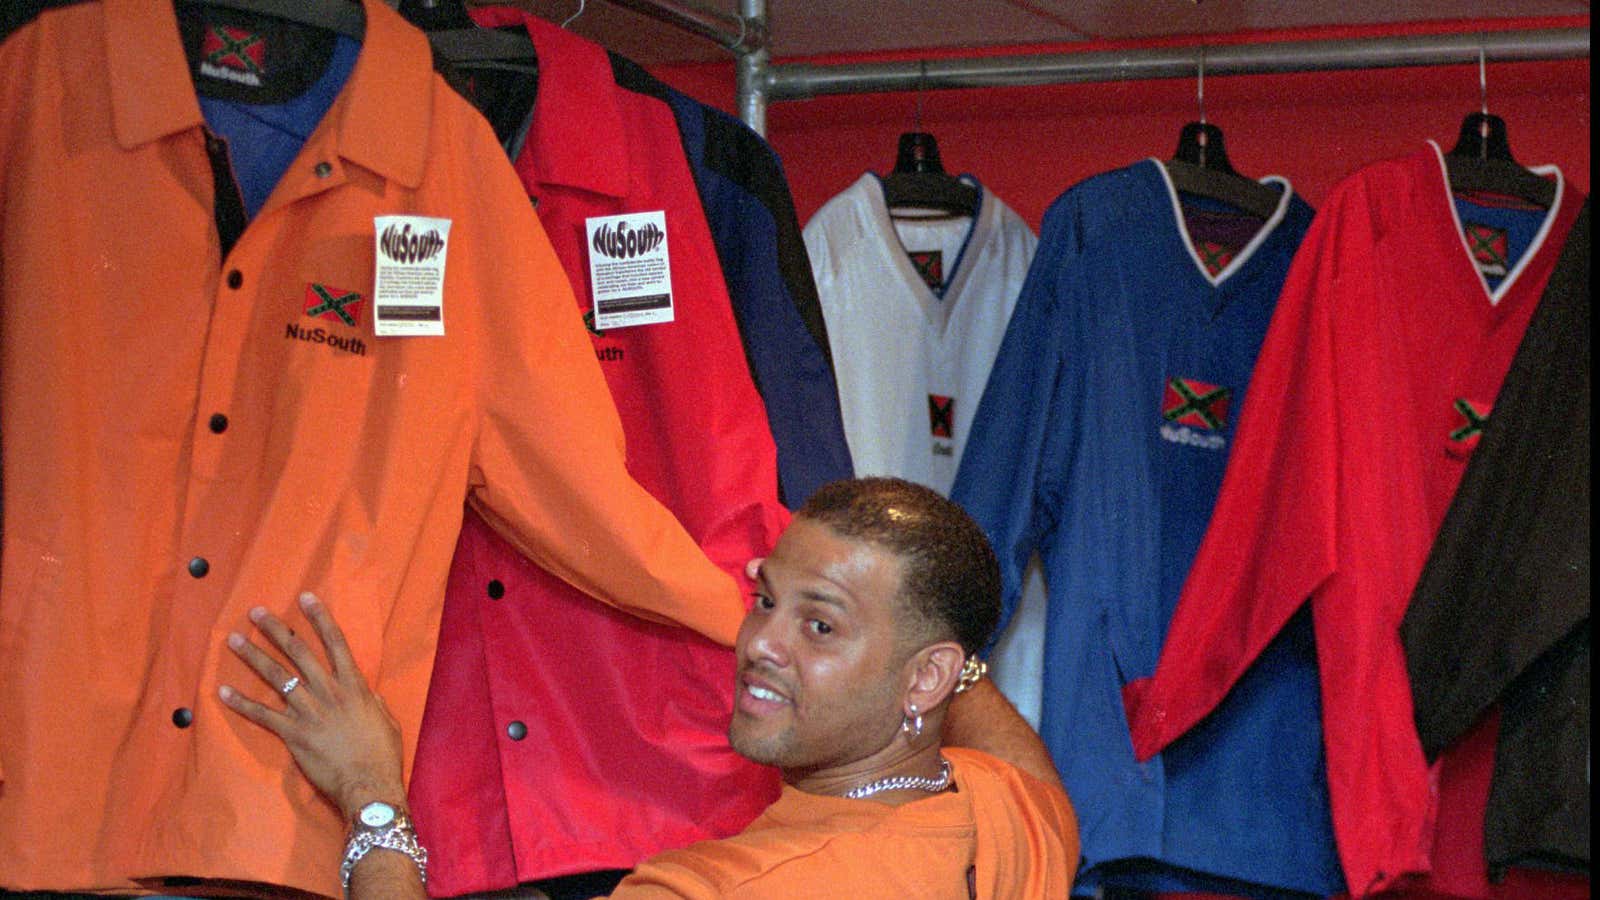 NuSouth co-founder Angel Quintero, pictured in 1999, looks through a rack of jackets in the brand’s Charleston, SC store.